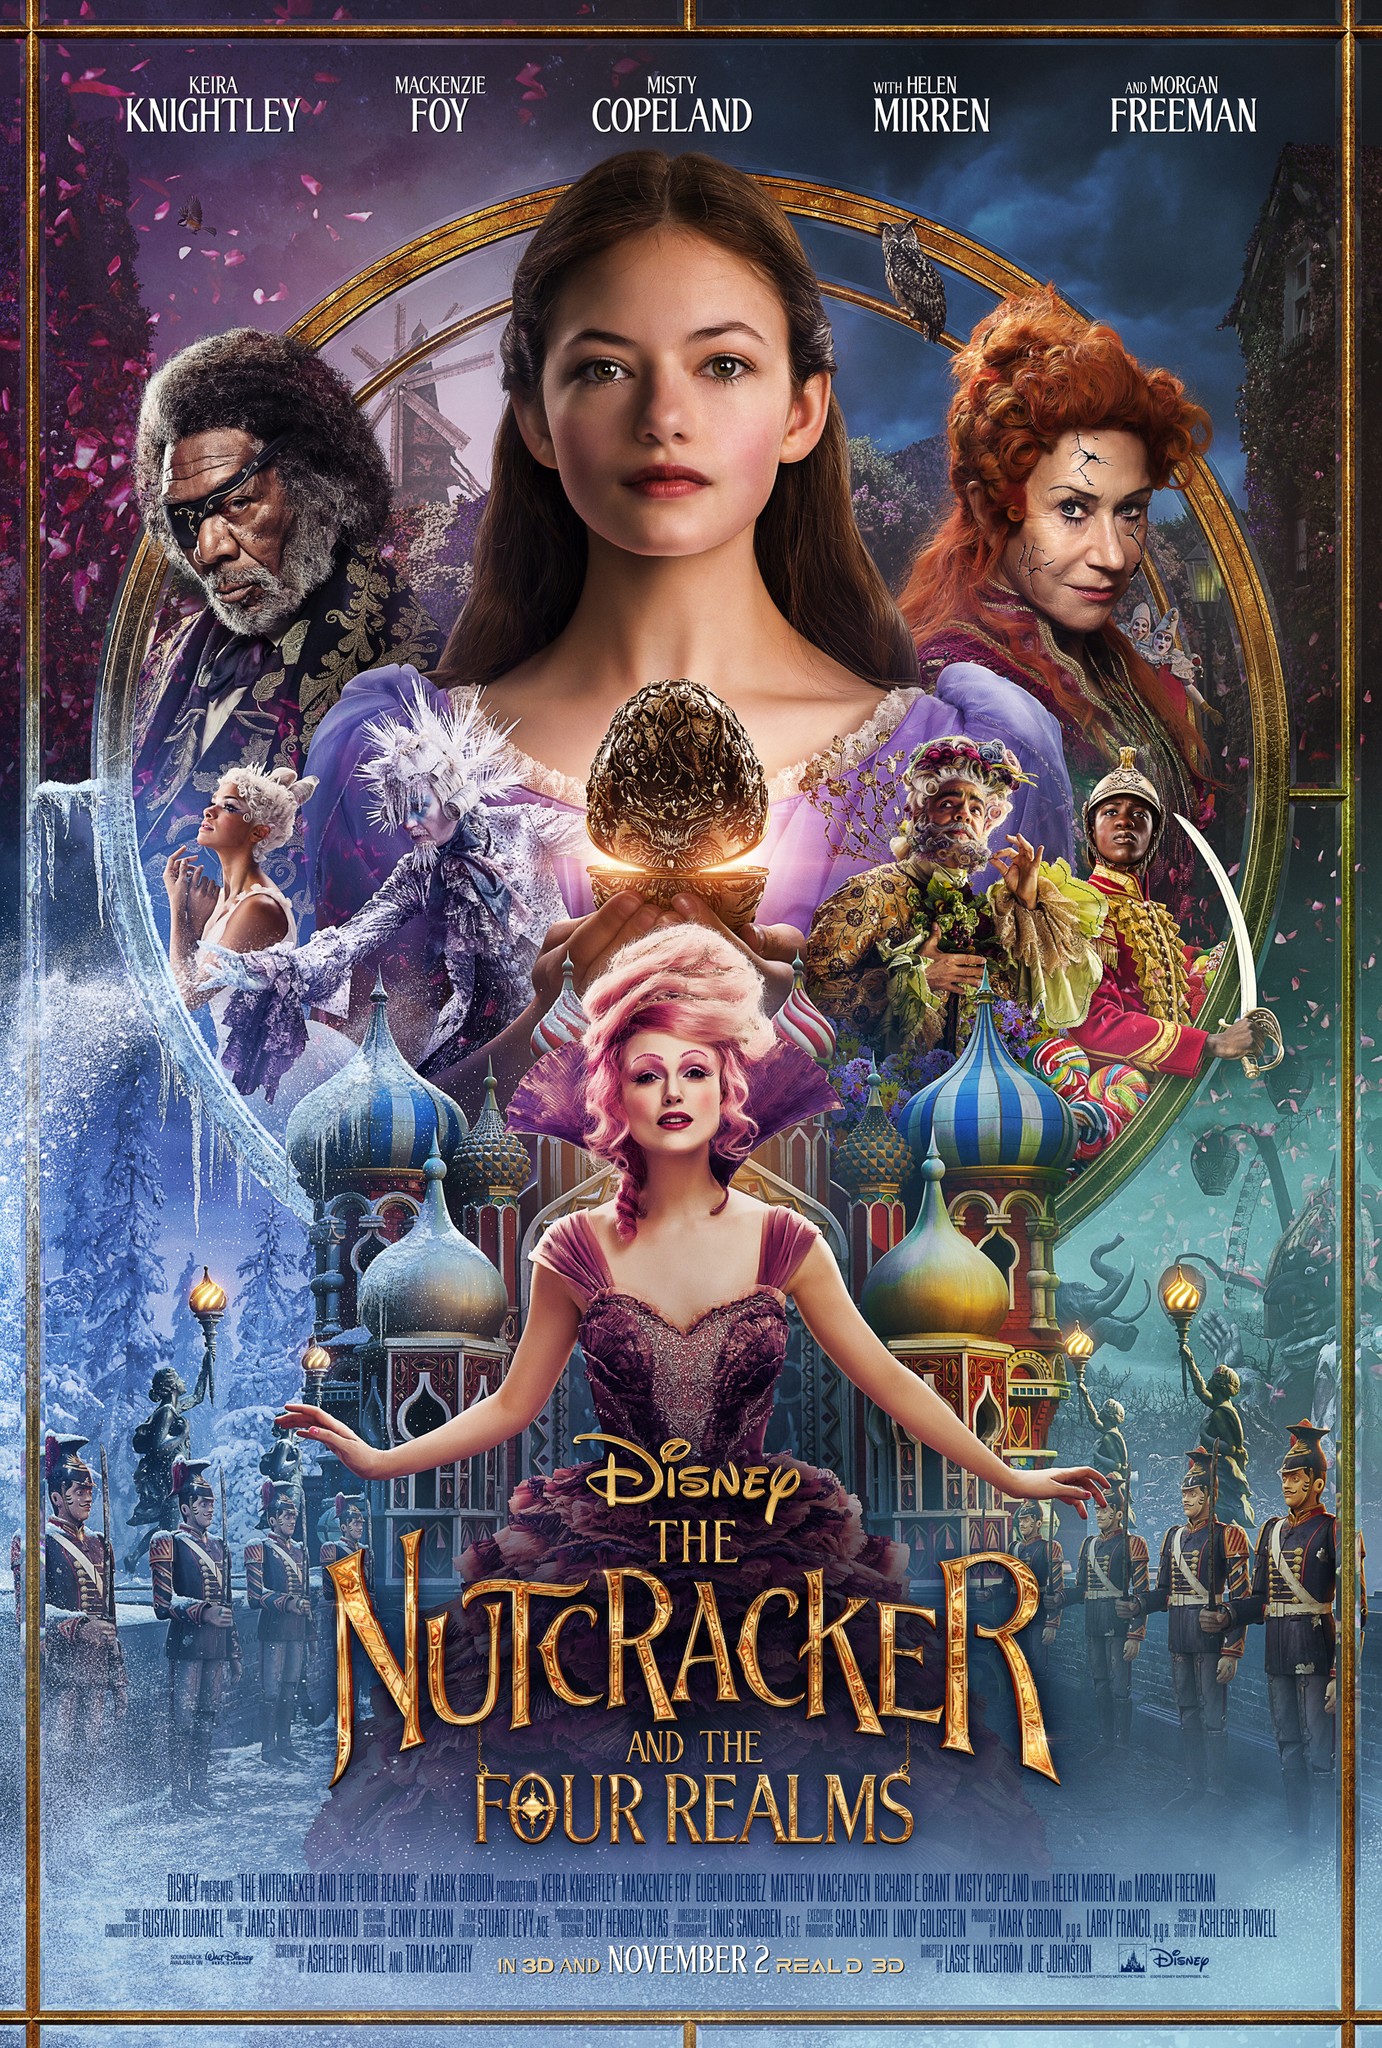 The Nutcracker and the Four Realms (2018) 1080p BluRay Hindi Dual Audio Movie ESubs [1.9GB]